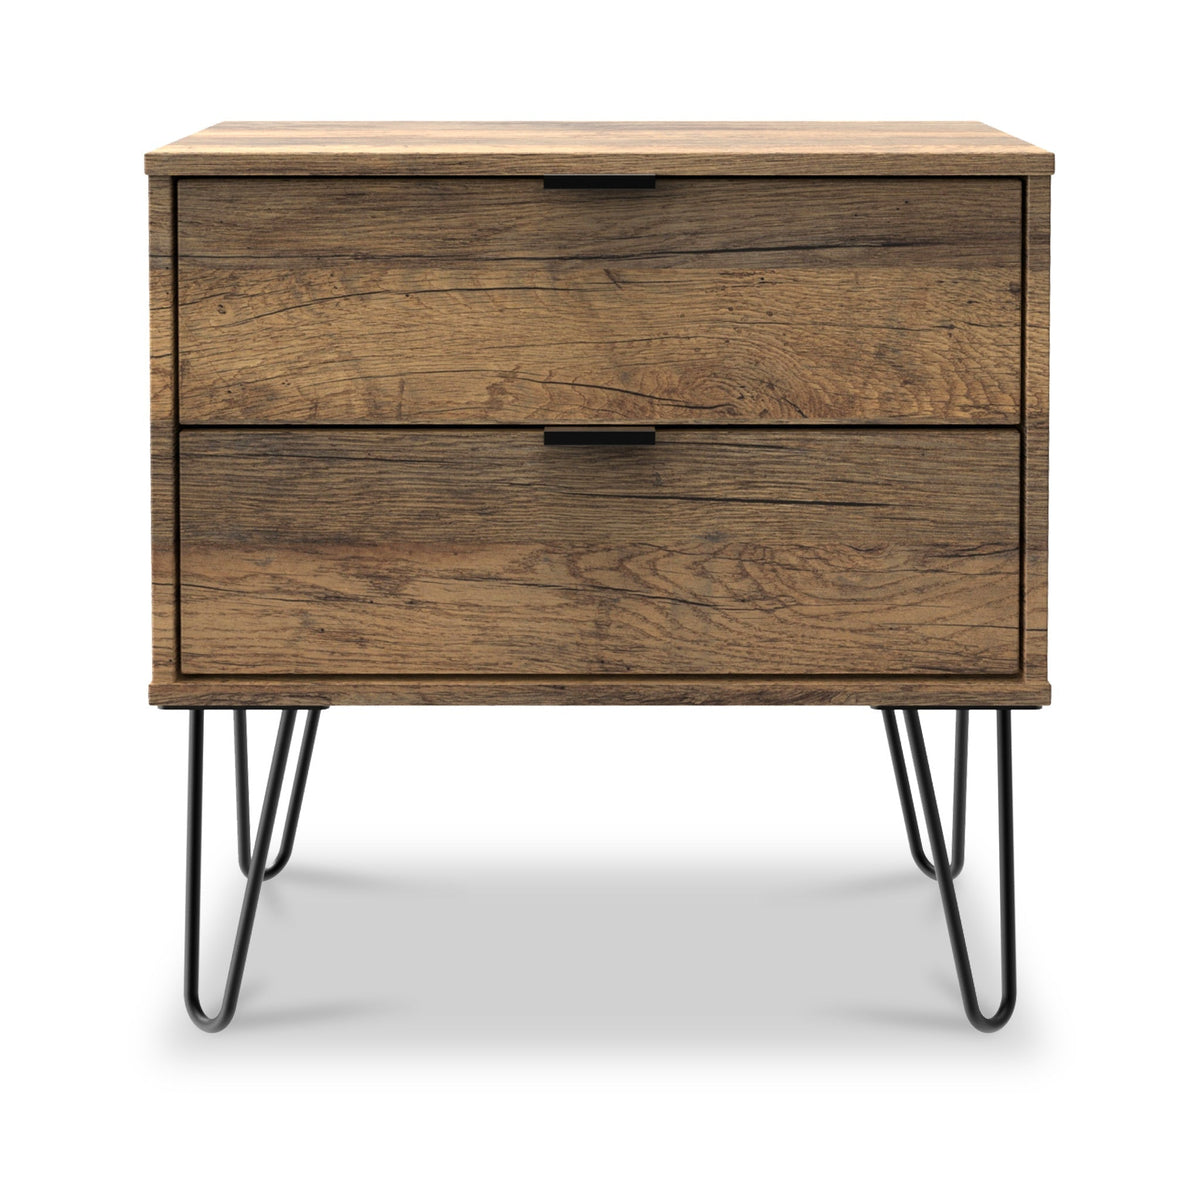 Moreno Rustic Oak 2 Drawer Side Table with Black Hairpin Legs from Roseland Furniture